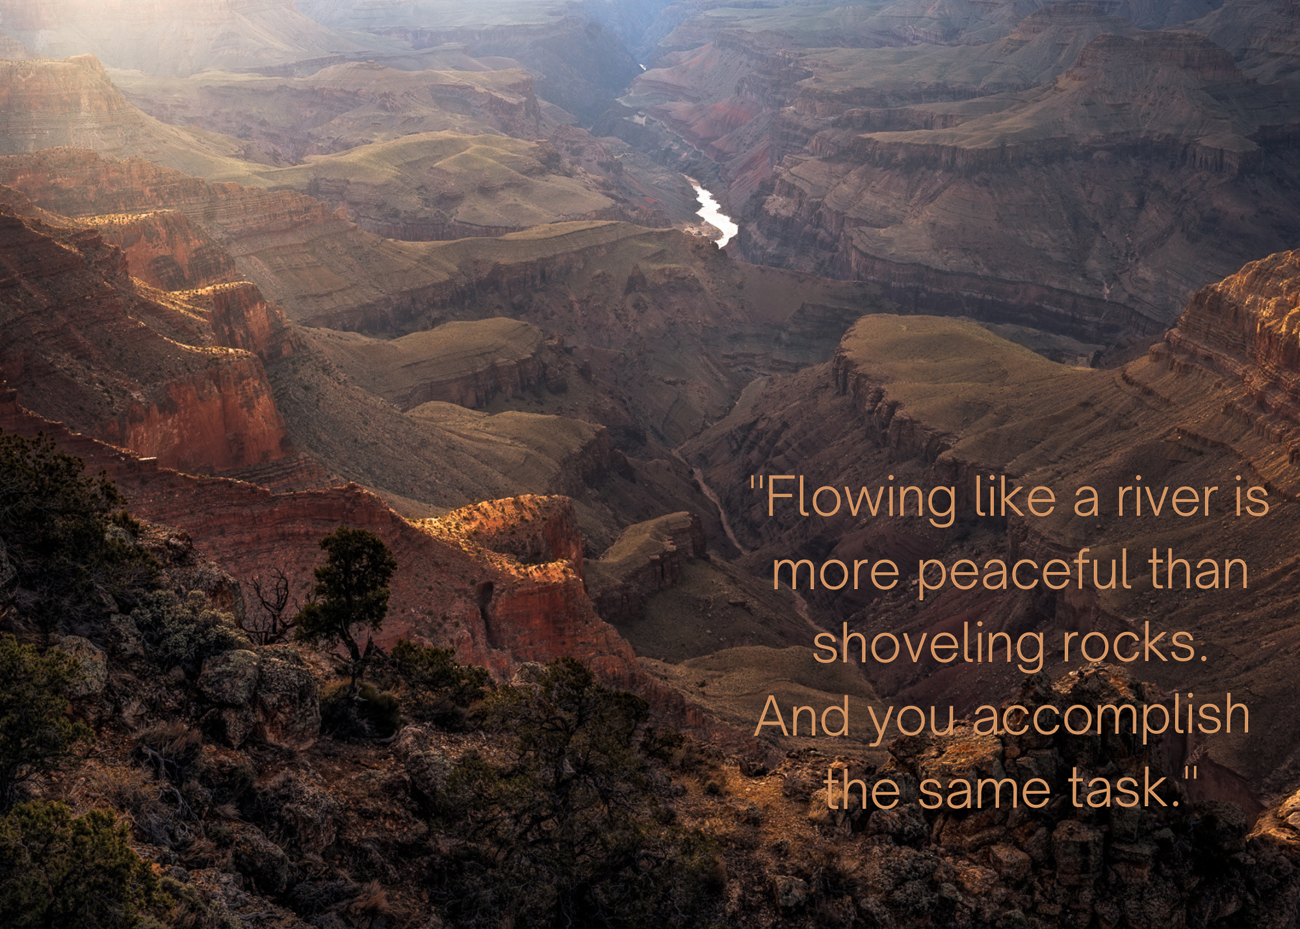 A photo of the sunset in the Grand Canyon and a quote about flowing with ease.